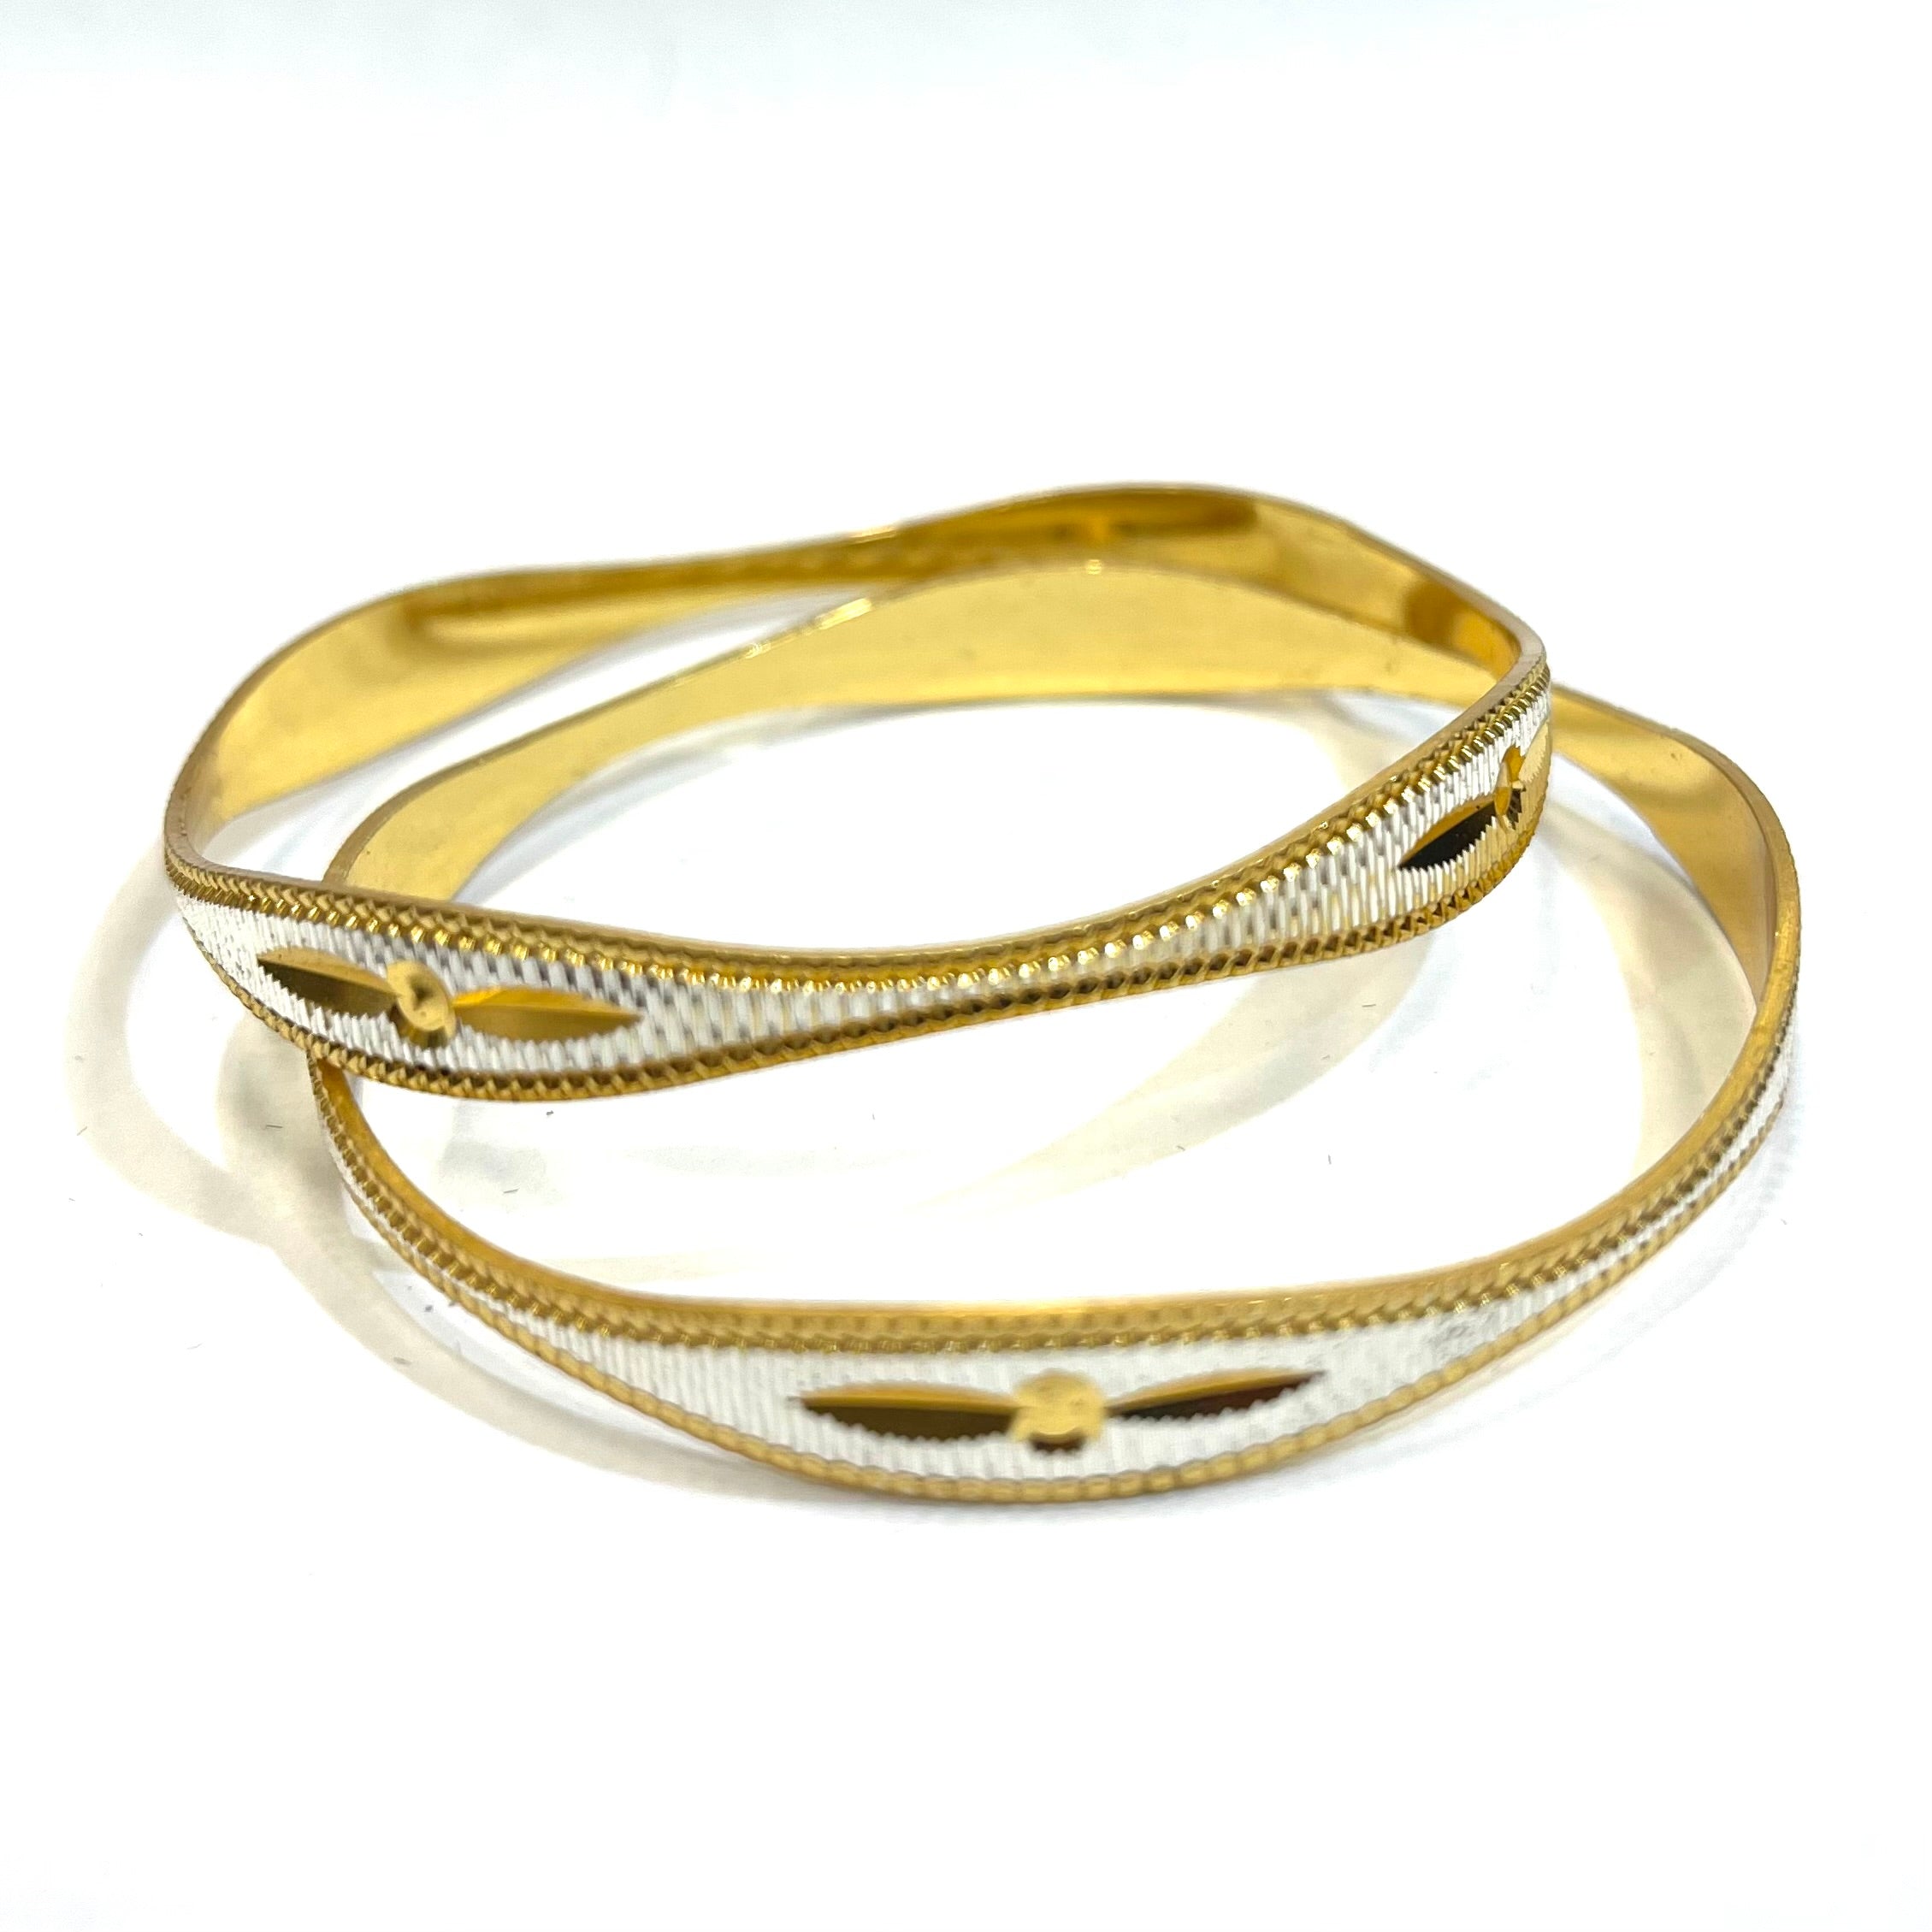 Gleaming Perfection Gold Bangles